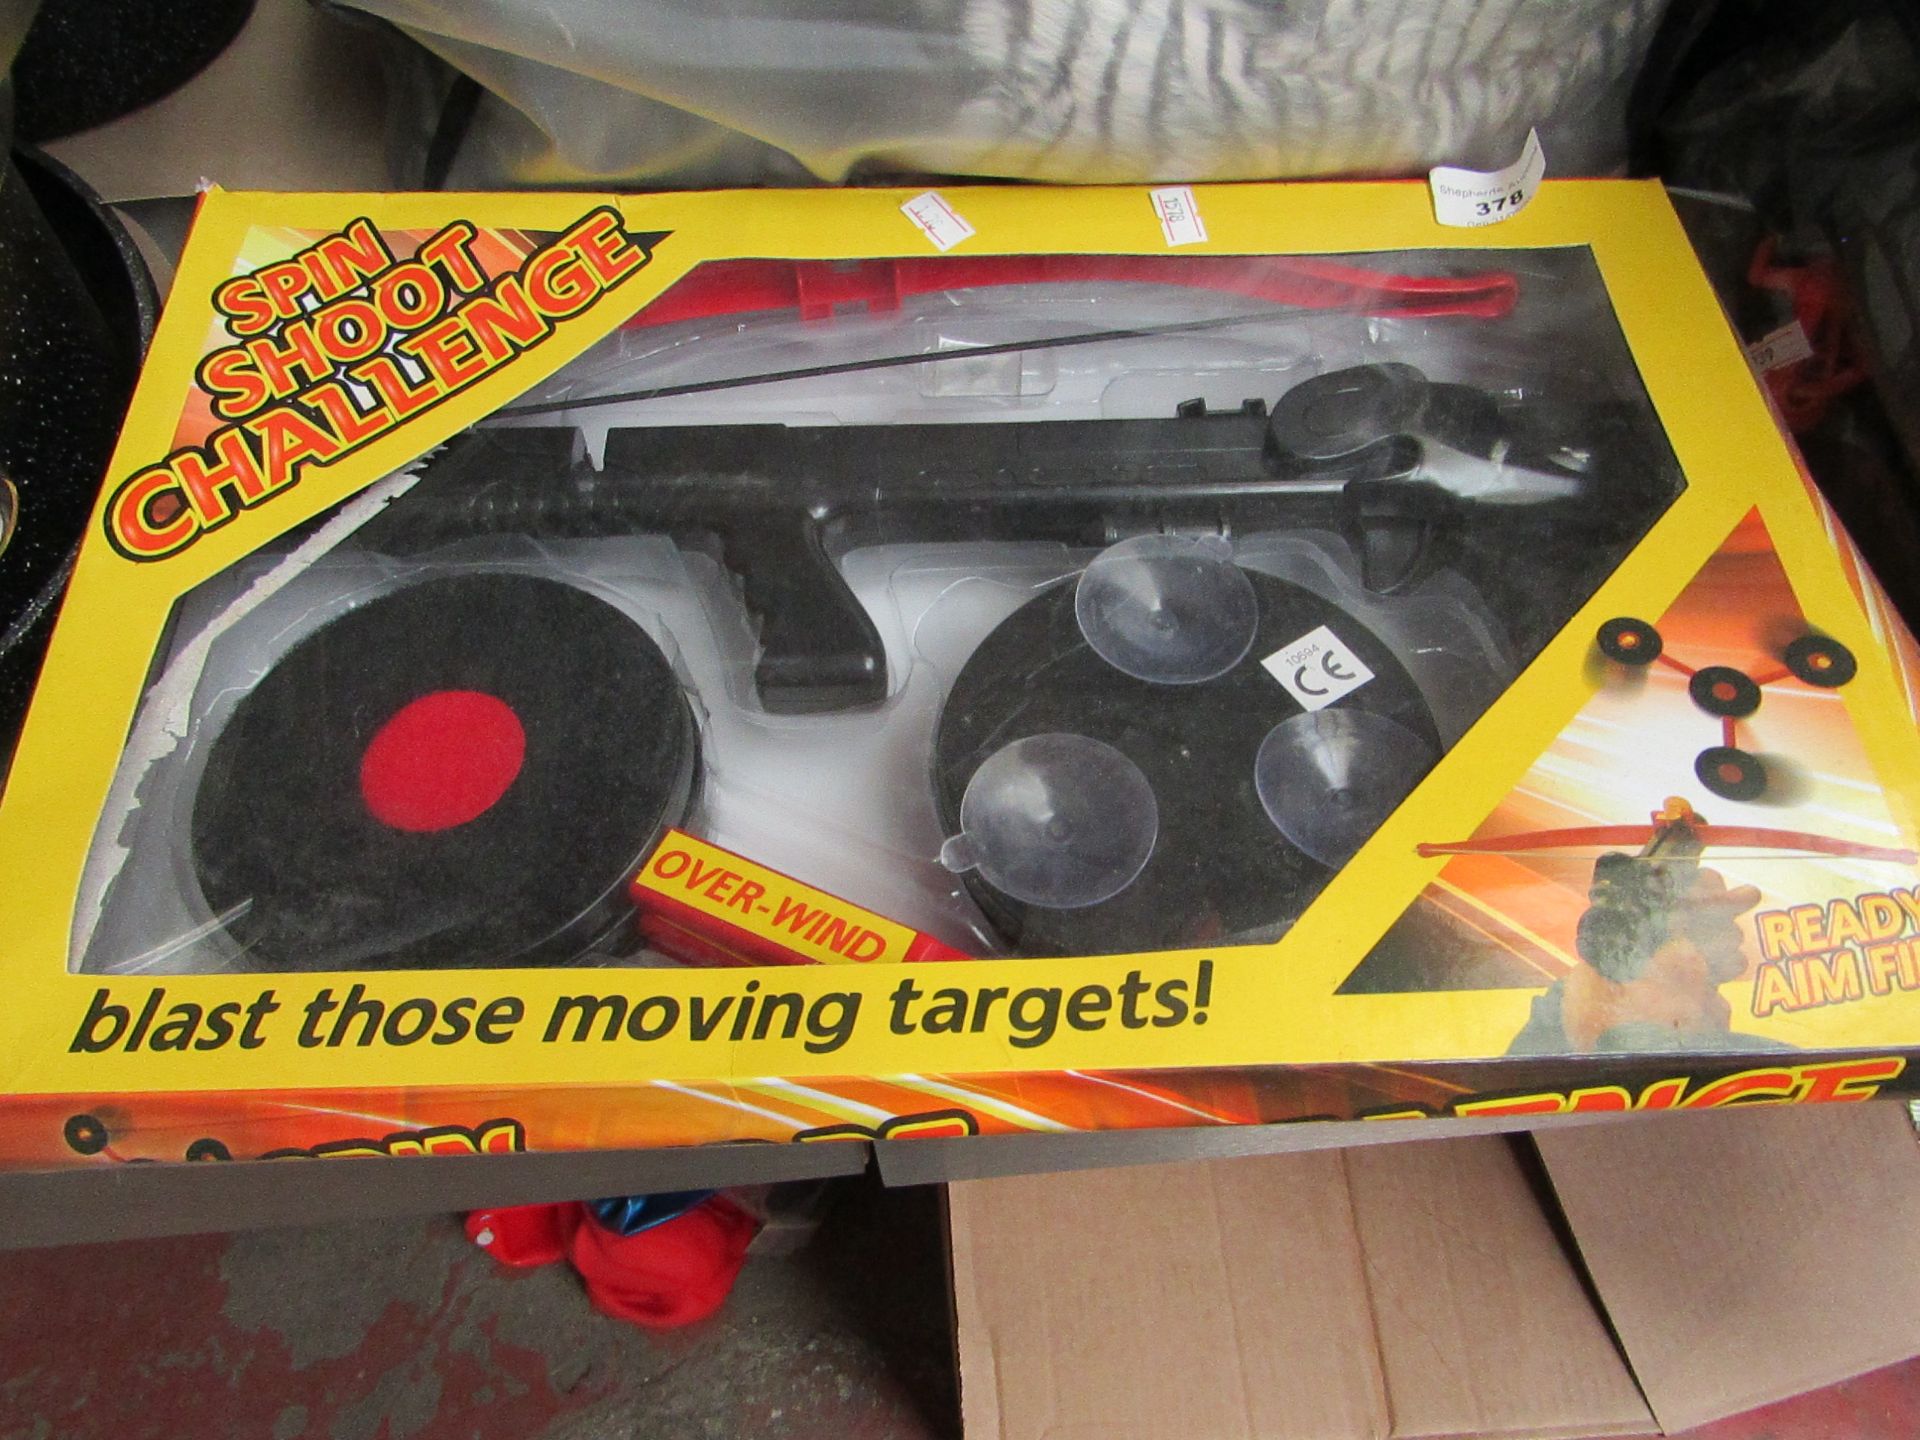 Spin Shoot Challenge Toy. Looks unused but packaging is slightly damaged